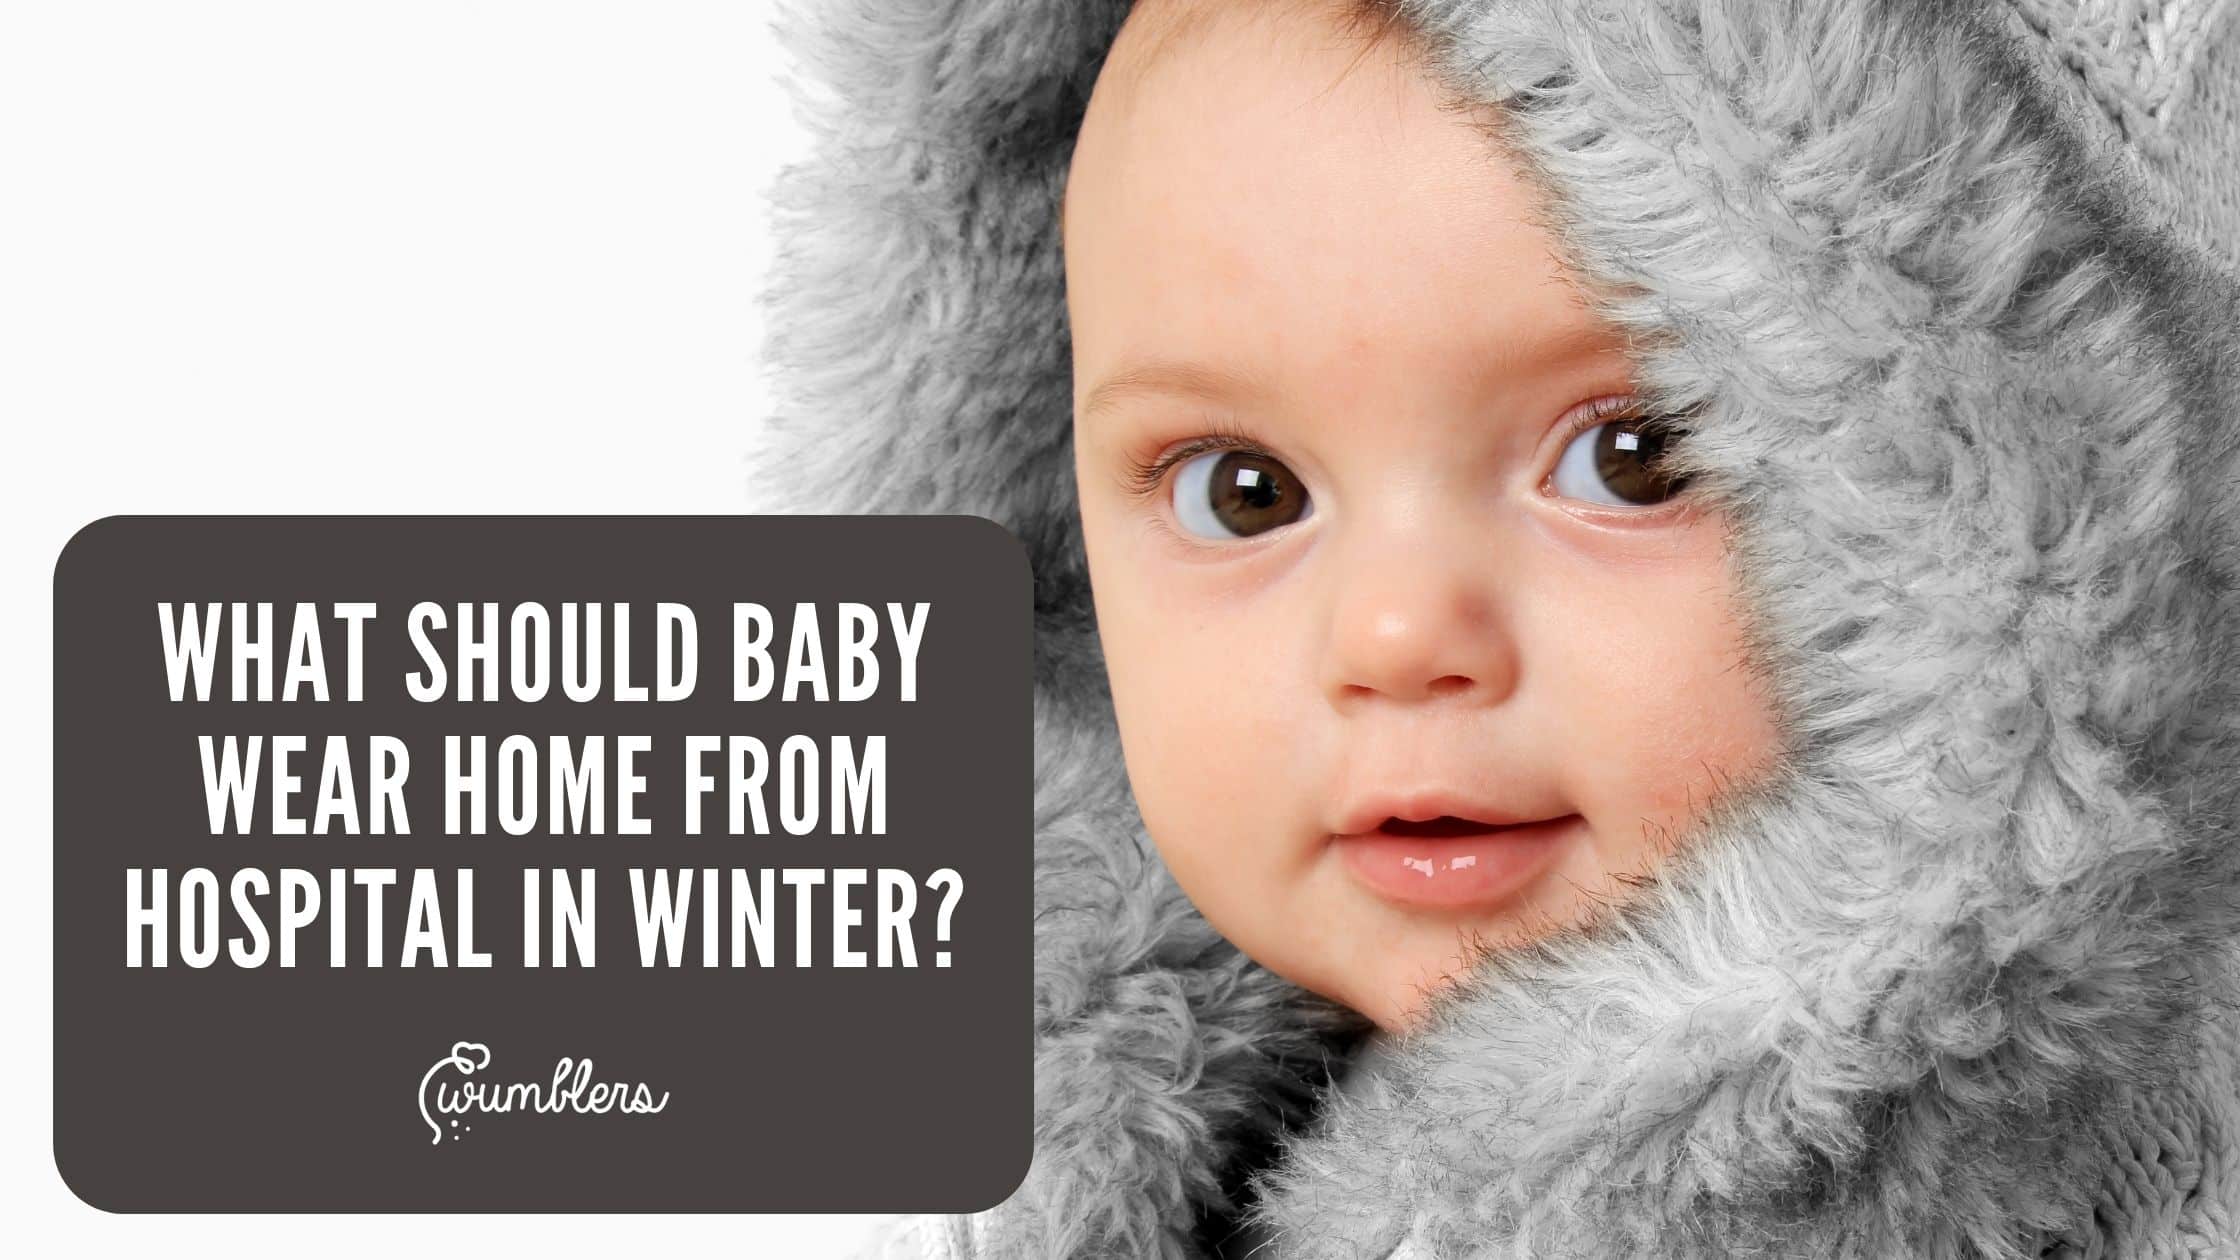 What Should Baby Wear Home From Hospital in Winter